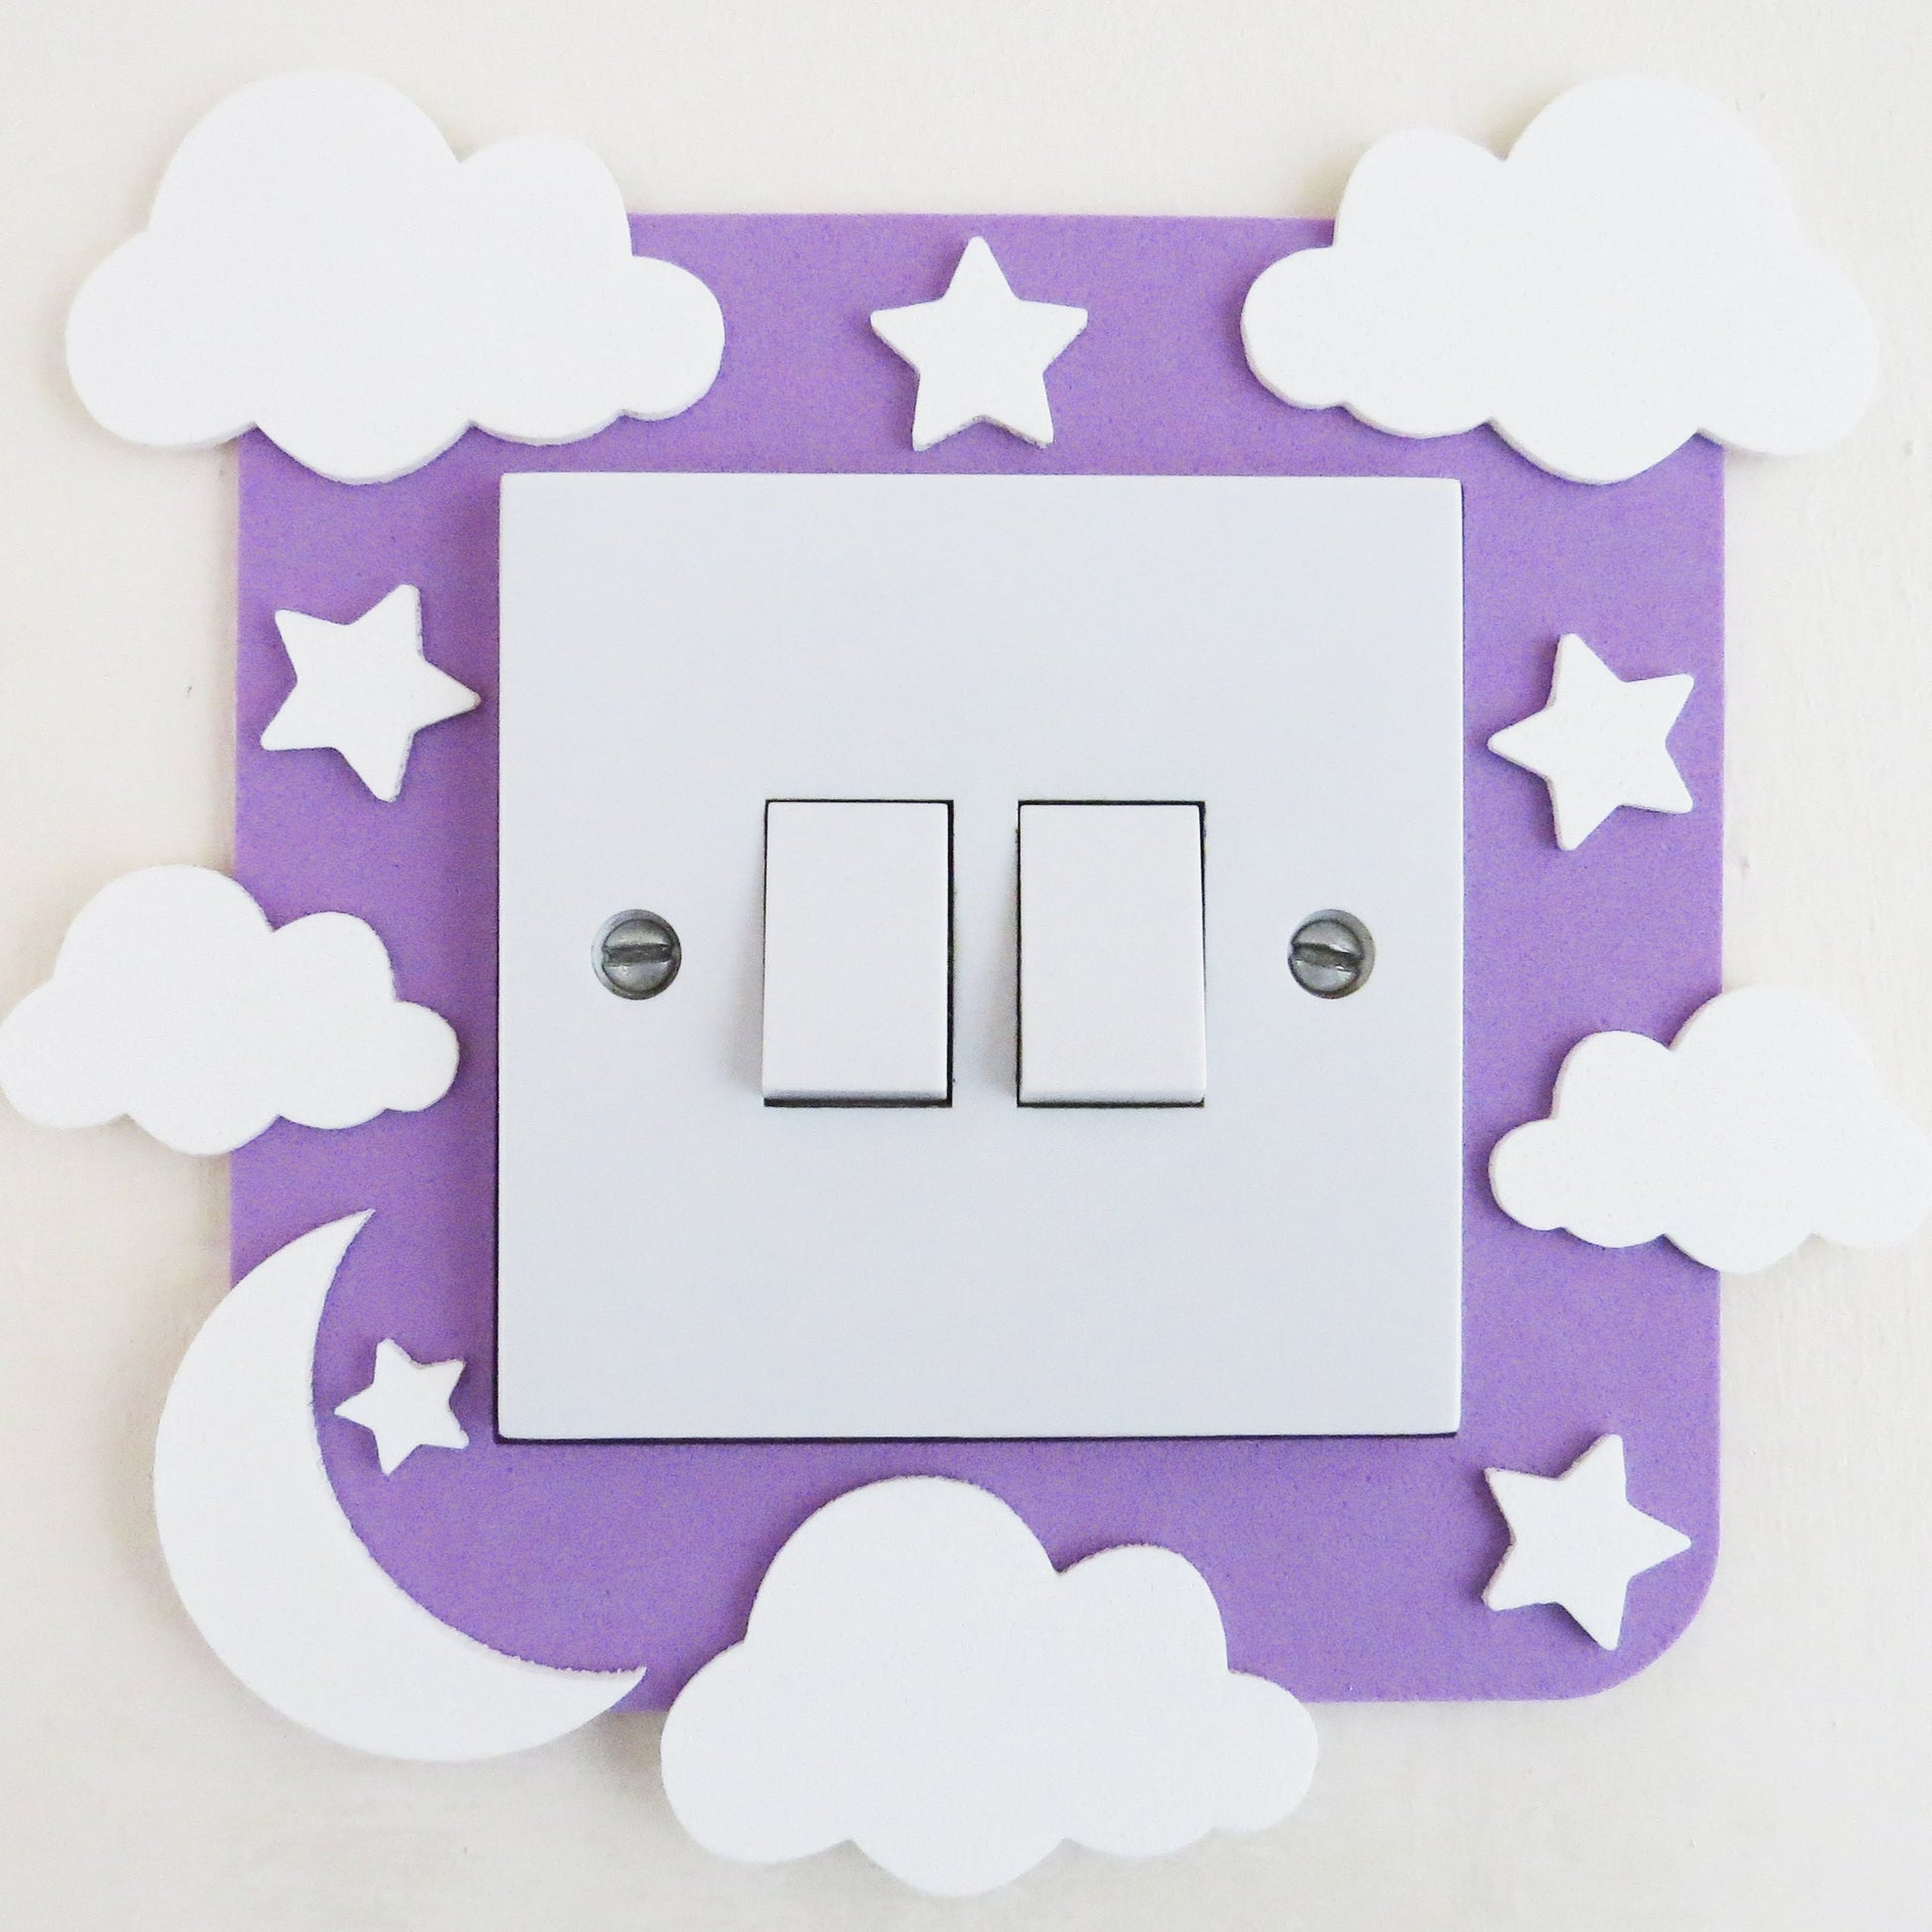 Craft foam light switch surround designed with clouds, stars and a moon.